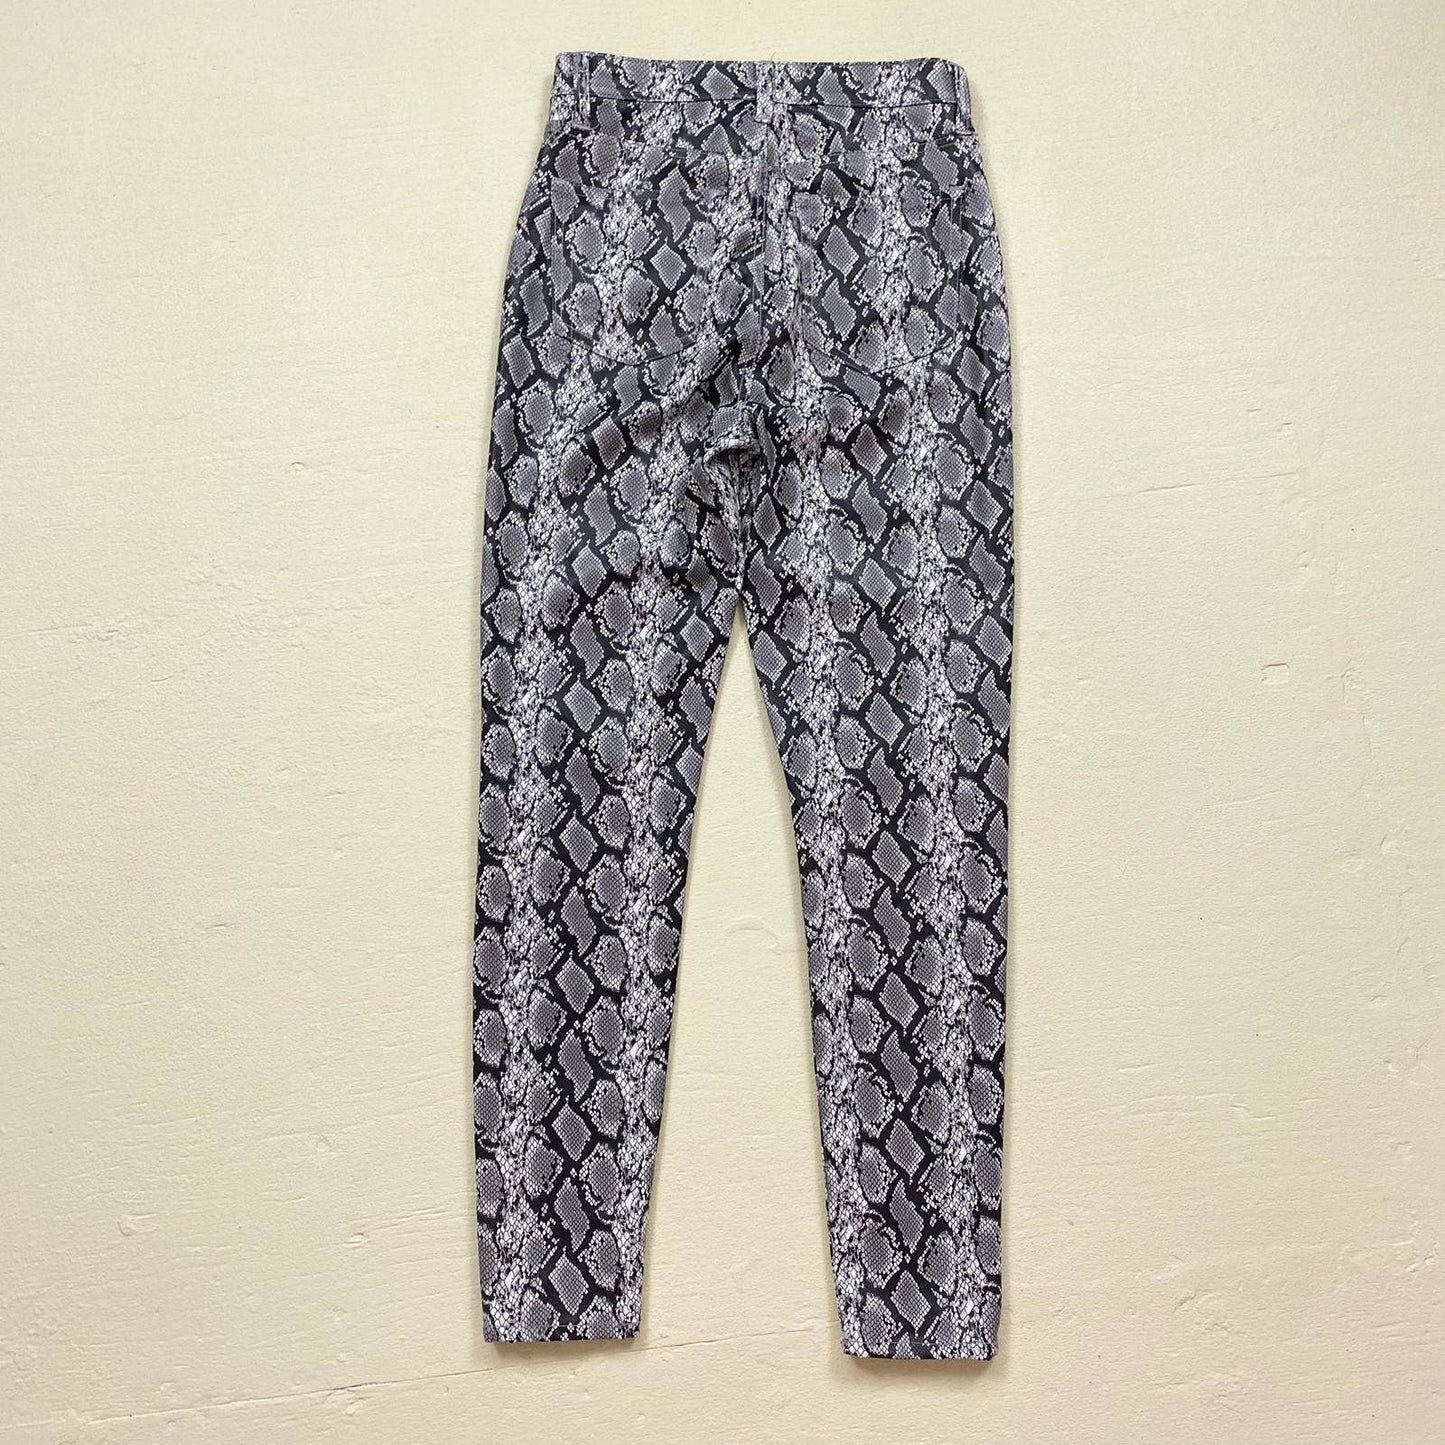 Preowned Kendall + Kylie The Skyscraper Faux Leather Snakeskin Pants, Size 28